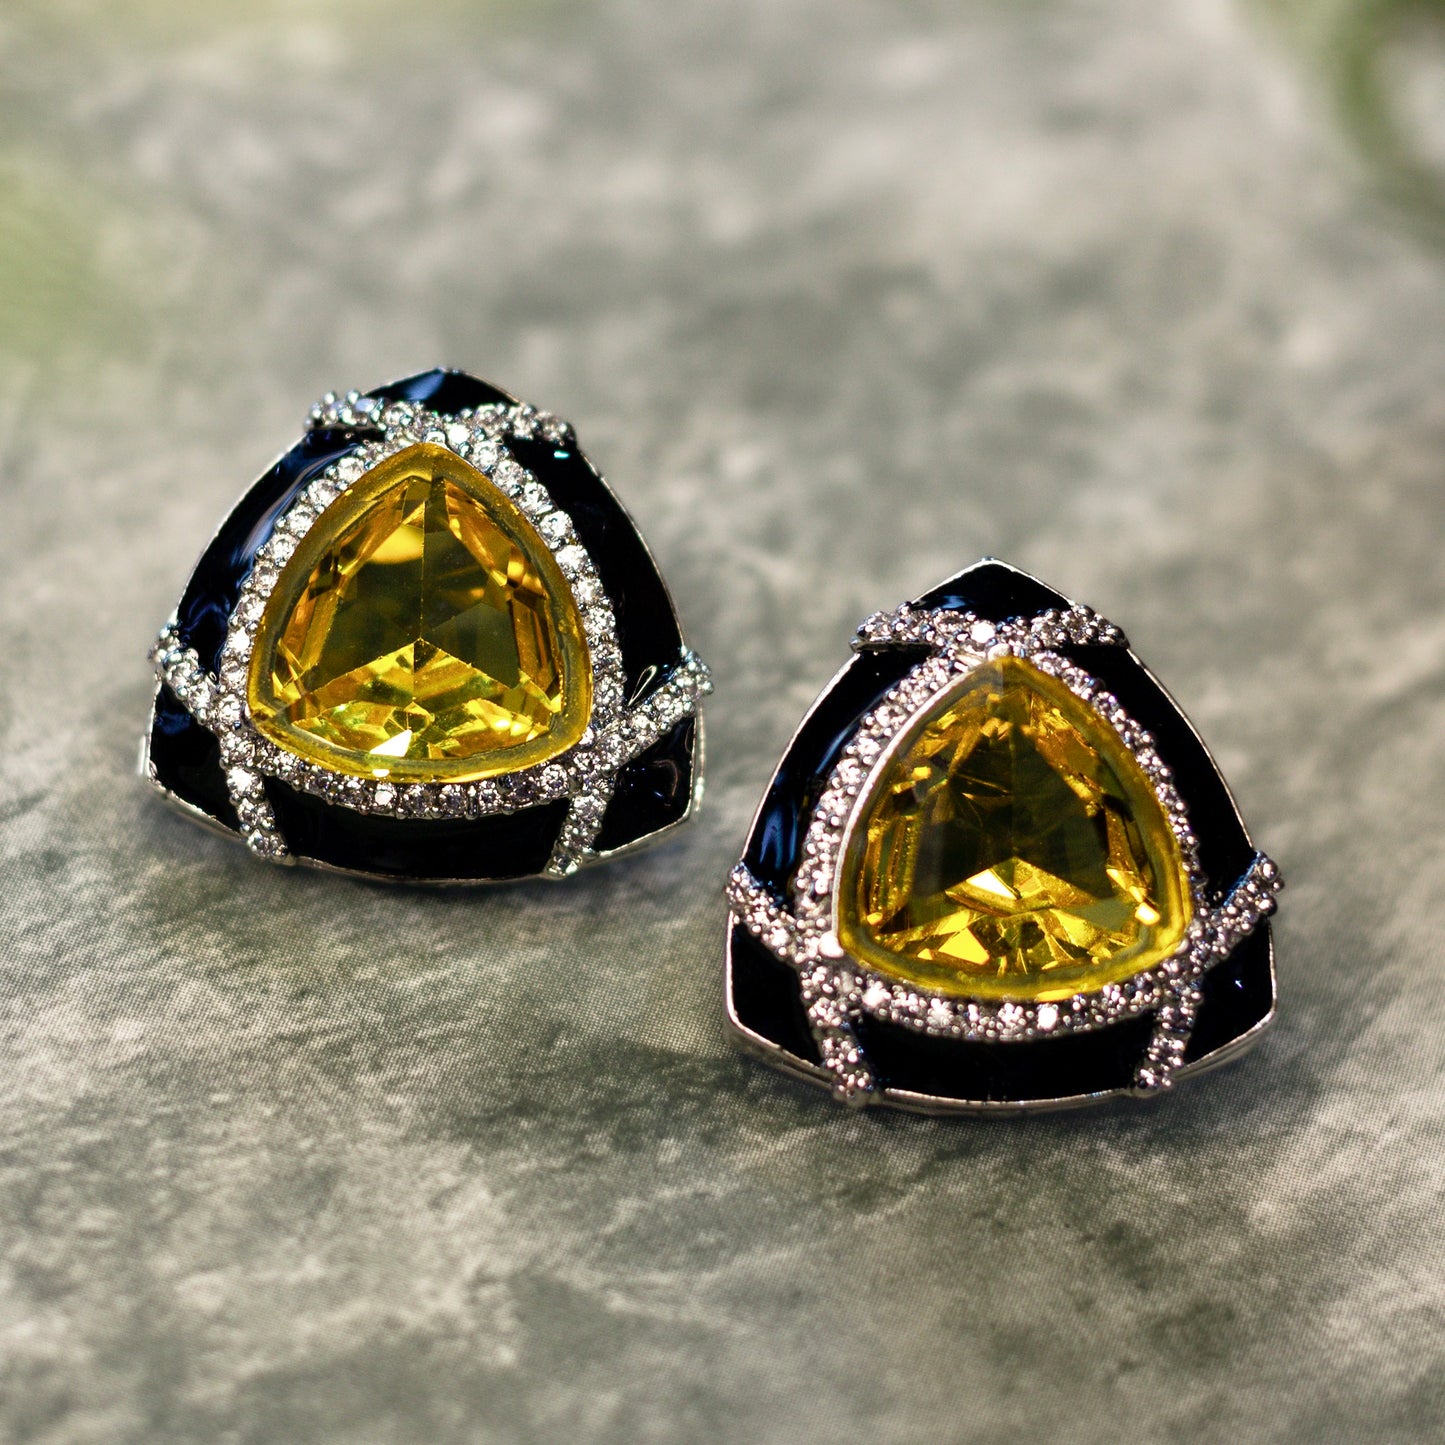 Black Enamelled Studs With Ruby Stone